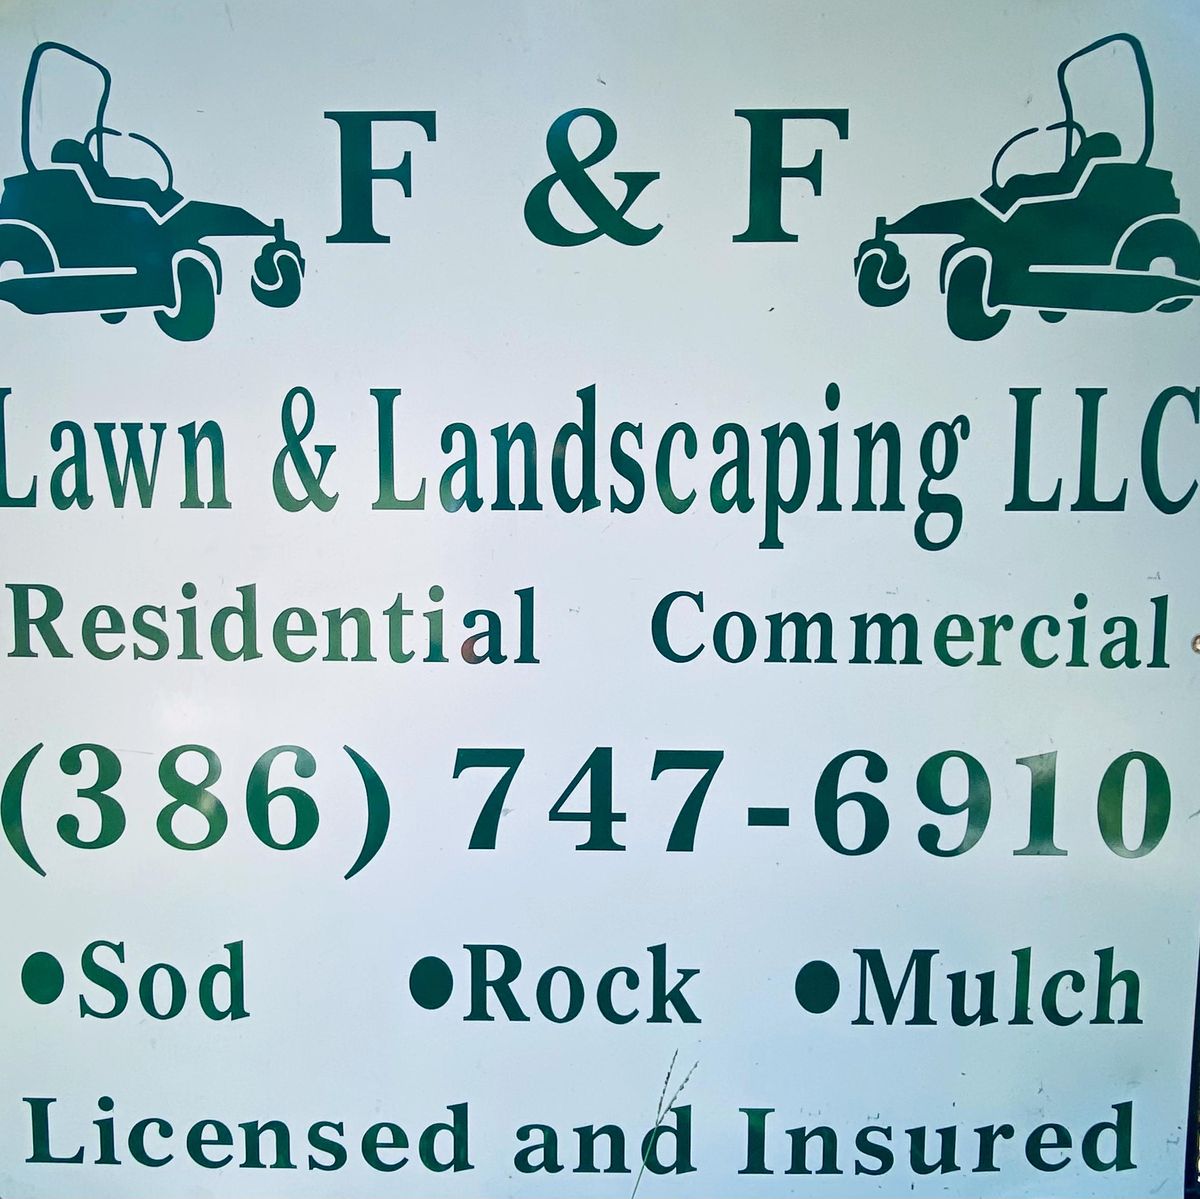 Mulch Rock Sod and Pine Needle Services for F & F Lawn & Landscaping LLC in Crescent City, FL